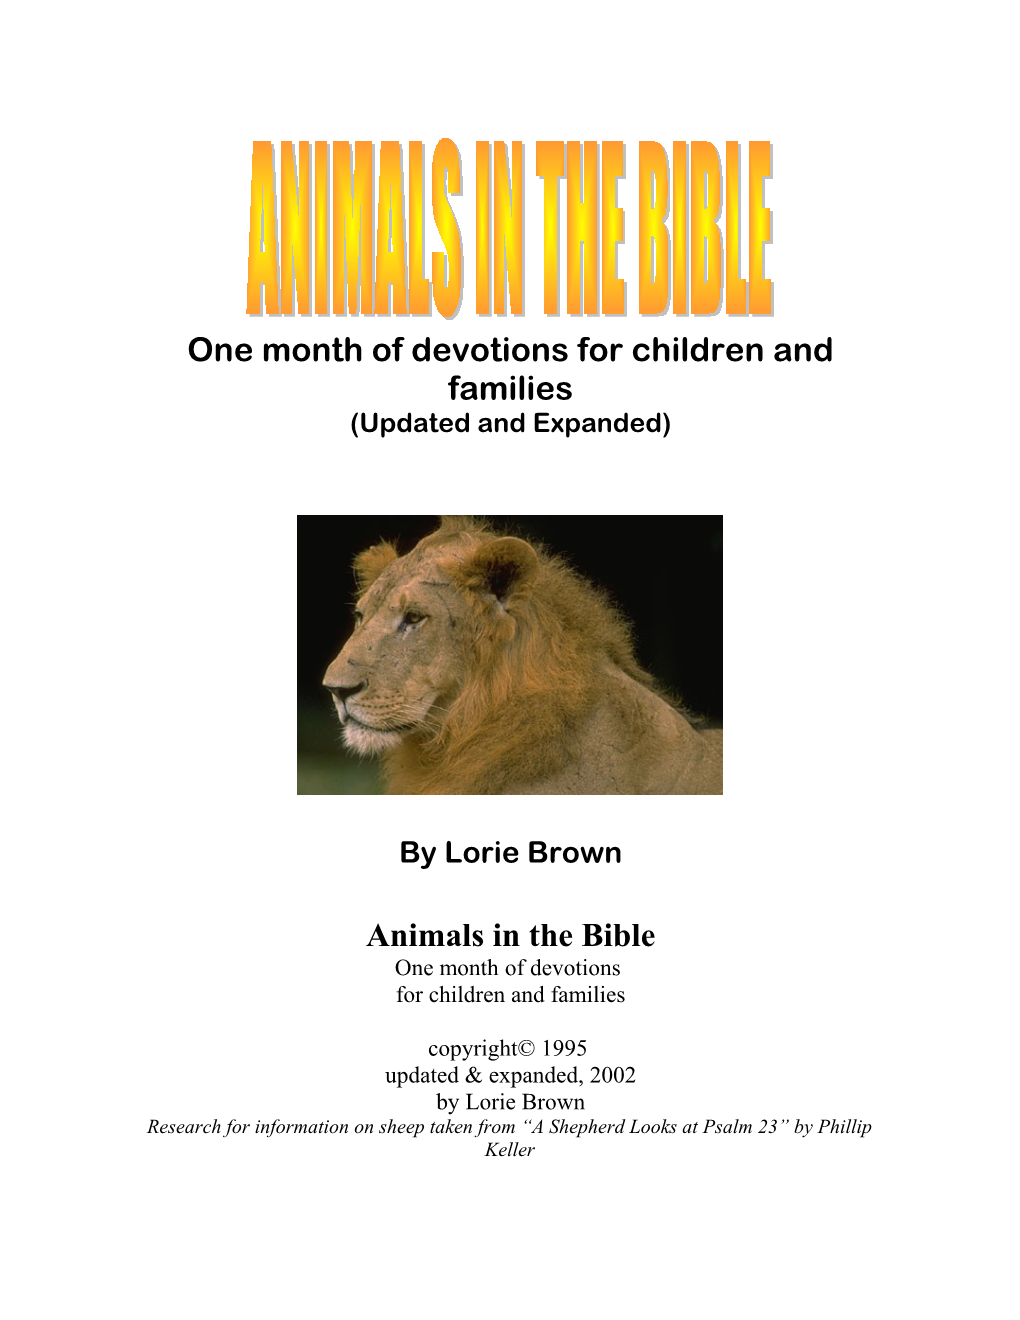 One Month of Devotions for Children and Families Animals in the Bible